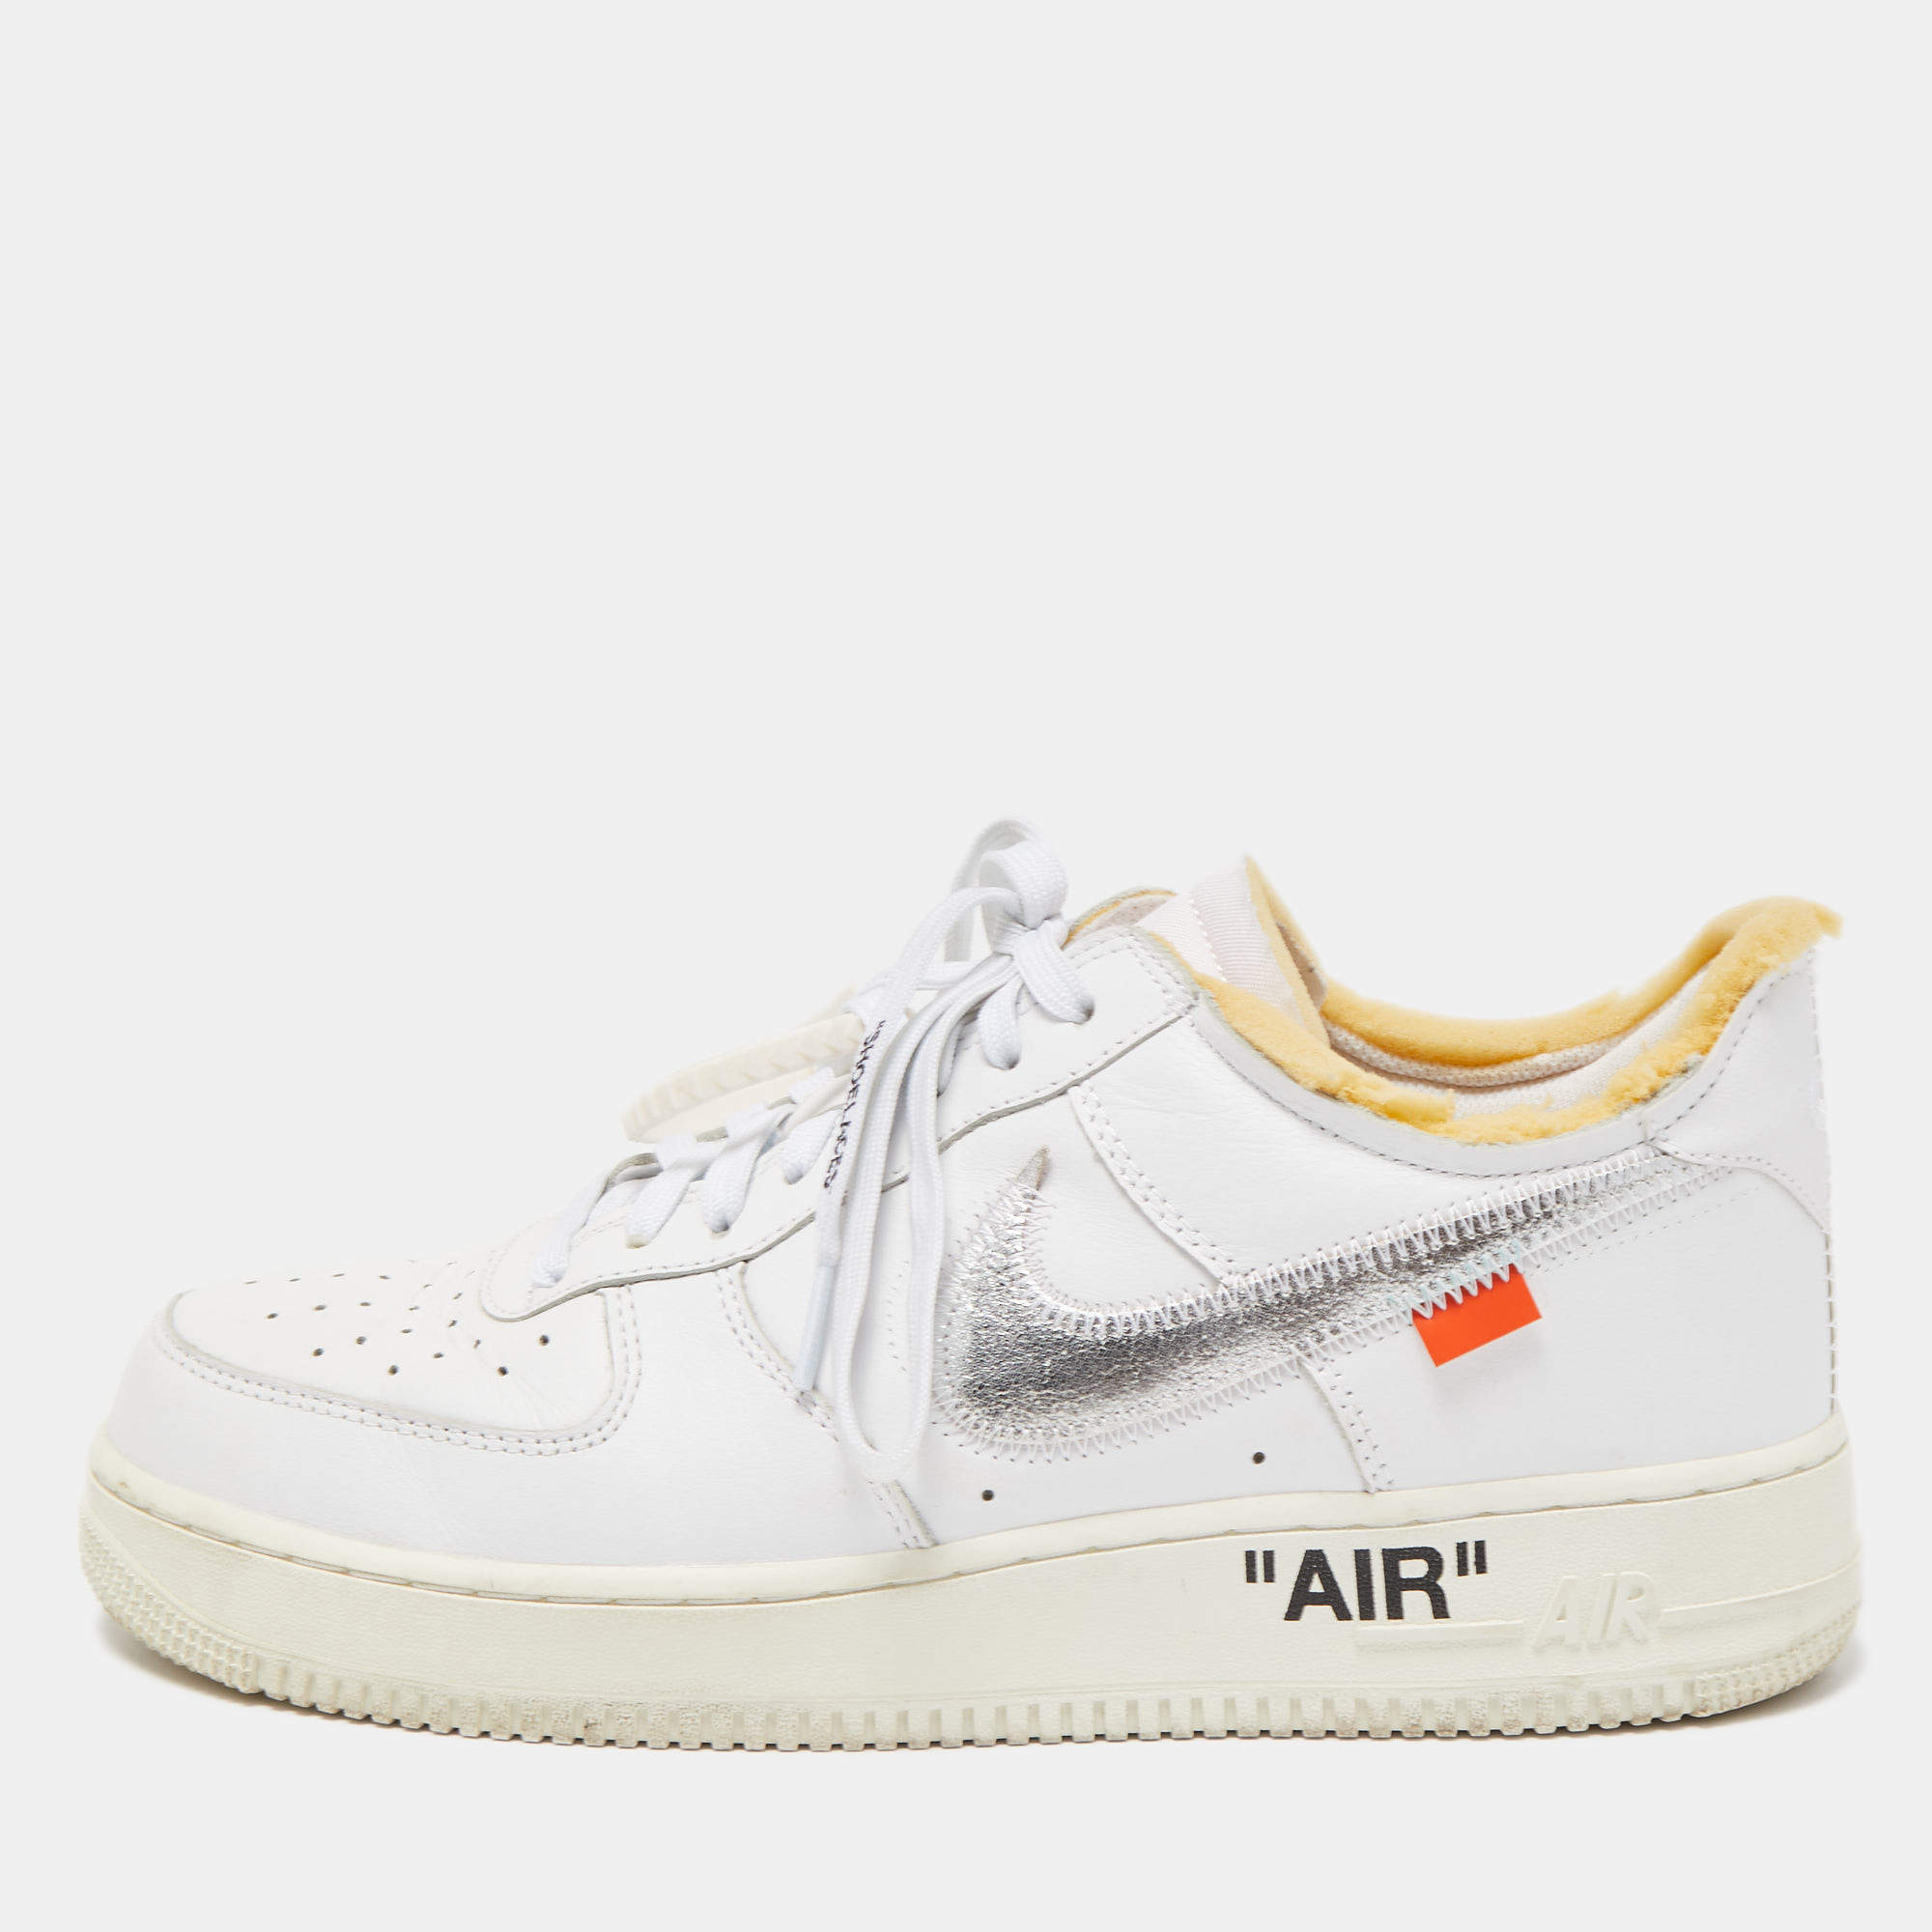 Air force 1 low trainers Nike x Off-White Yellow size 43 EU in